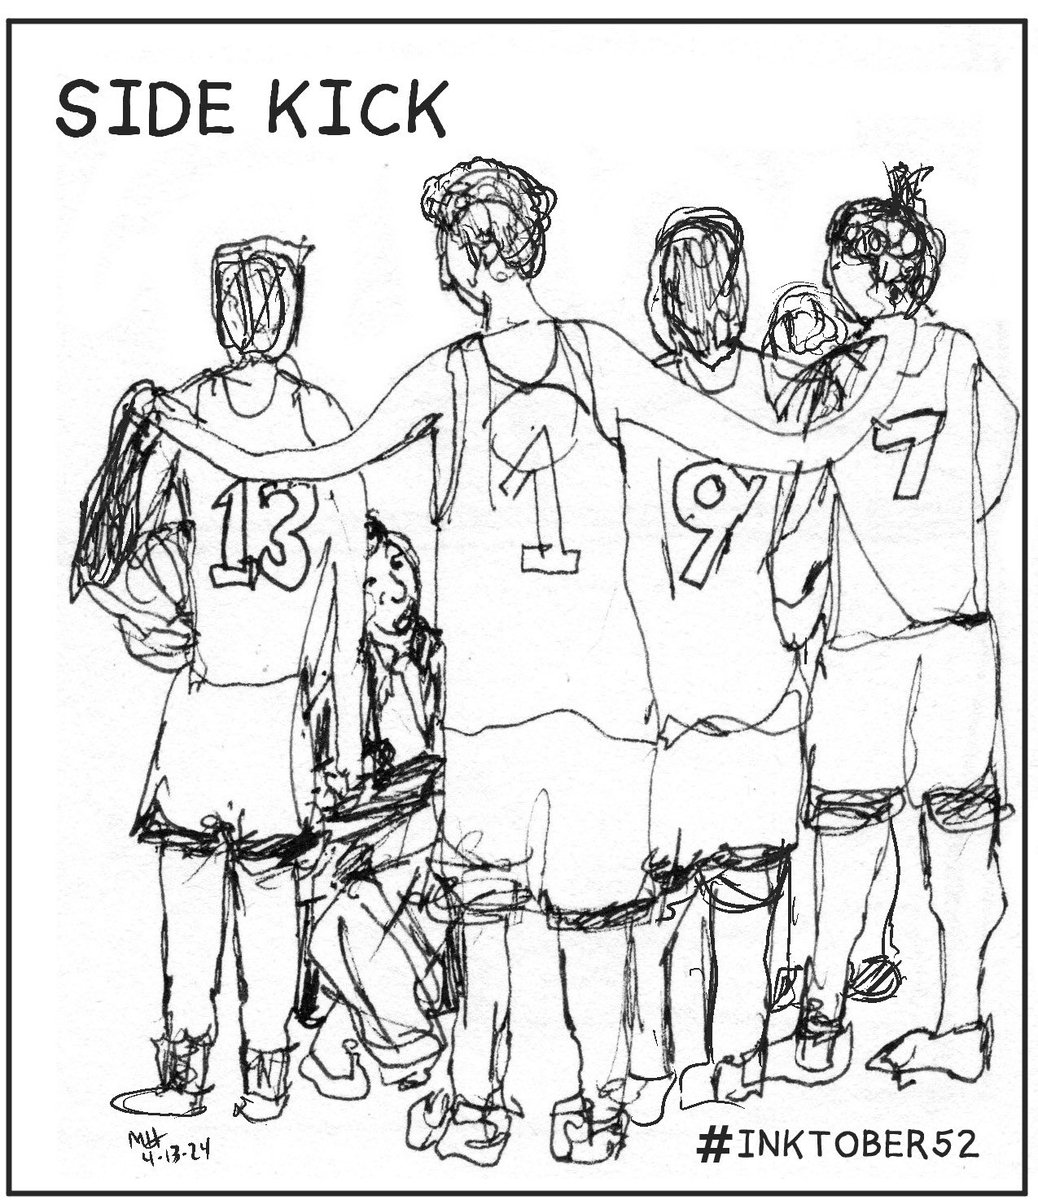 #Inktober52 Side Kick. A sketch from a recent NCAA Basketball Tournament timeout. I thought about how many of these teams are built around a few star players but the supporting cast, a.k.a. the side kicks, are the engine driving the team. #Inktober52SideKick #Inktober #kidlitart